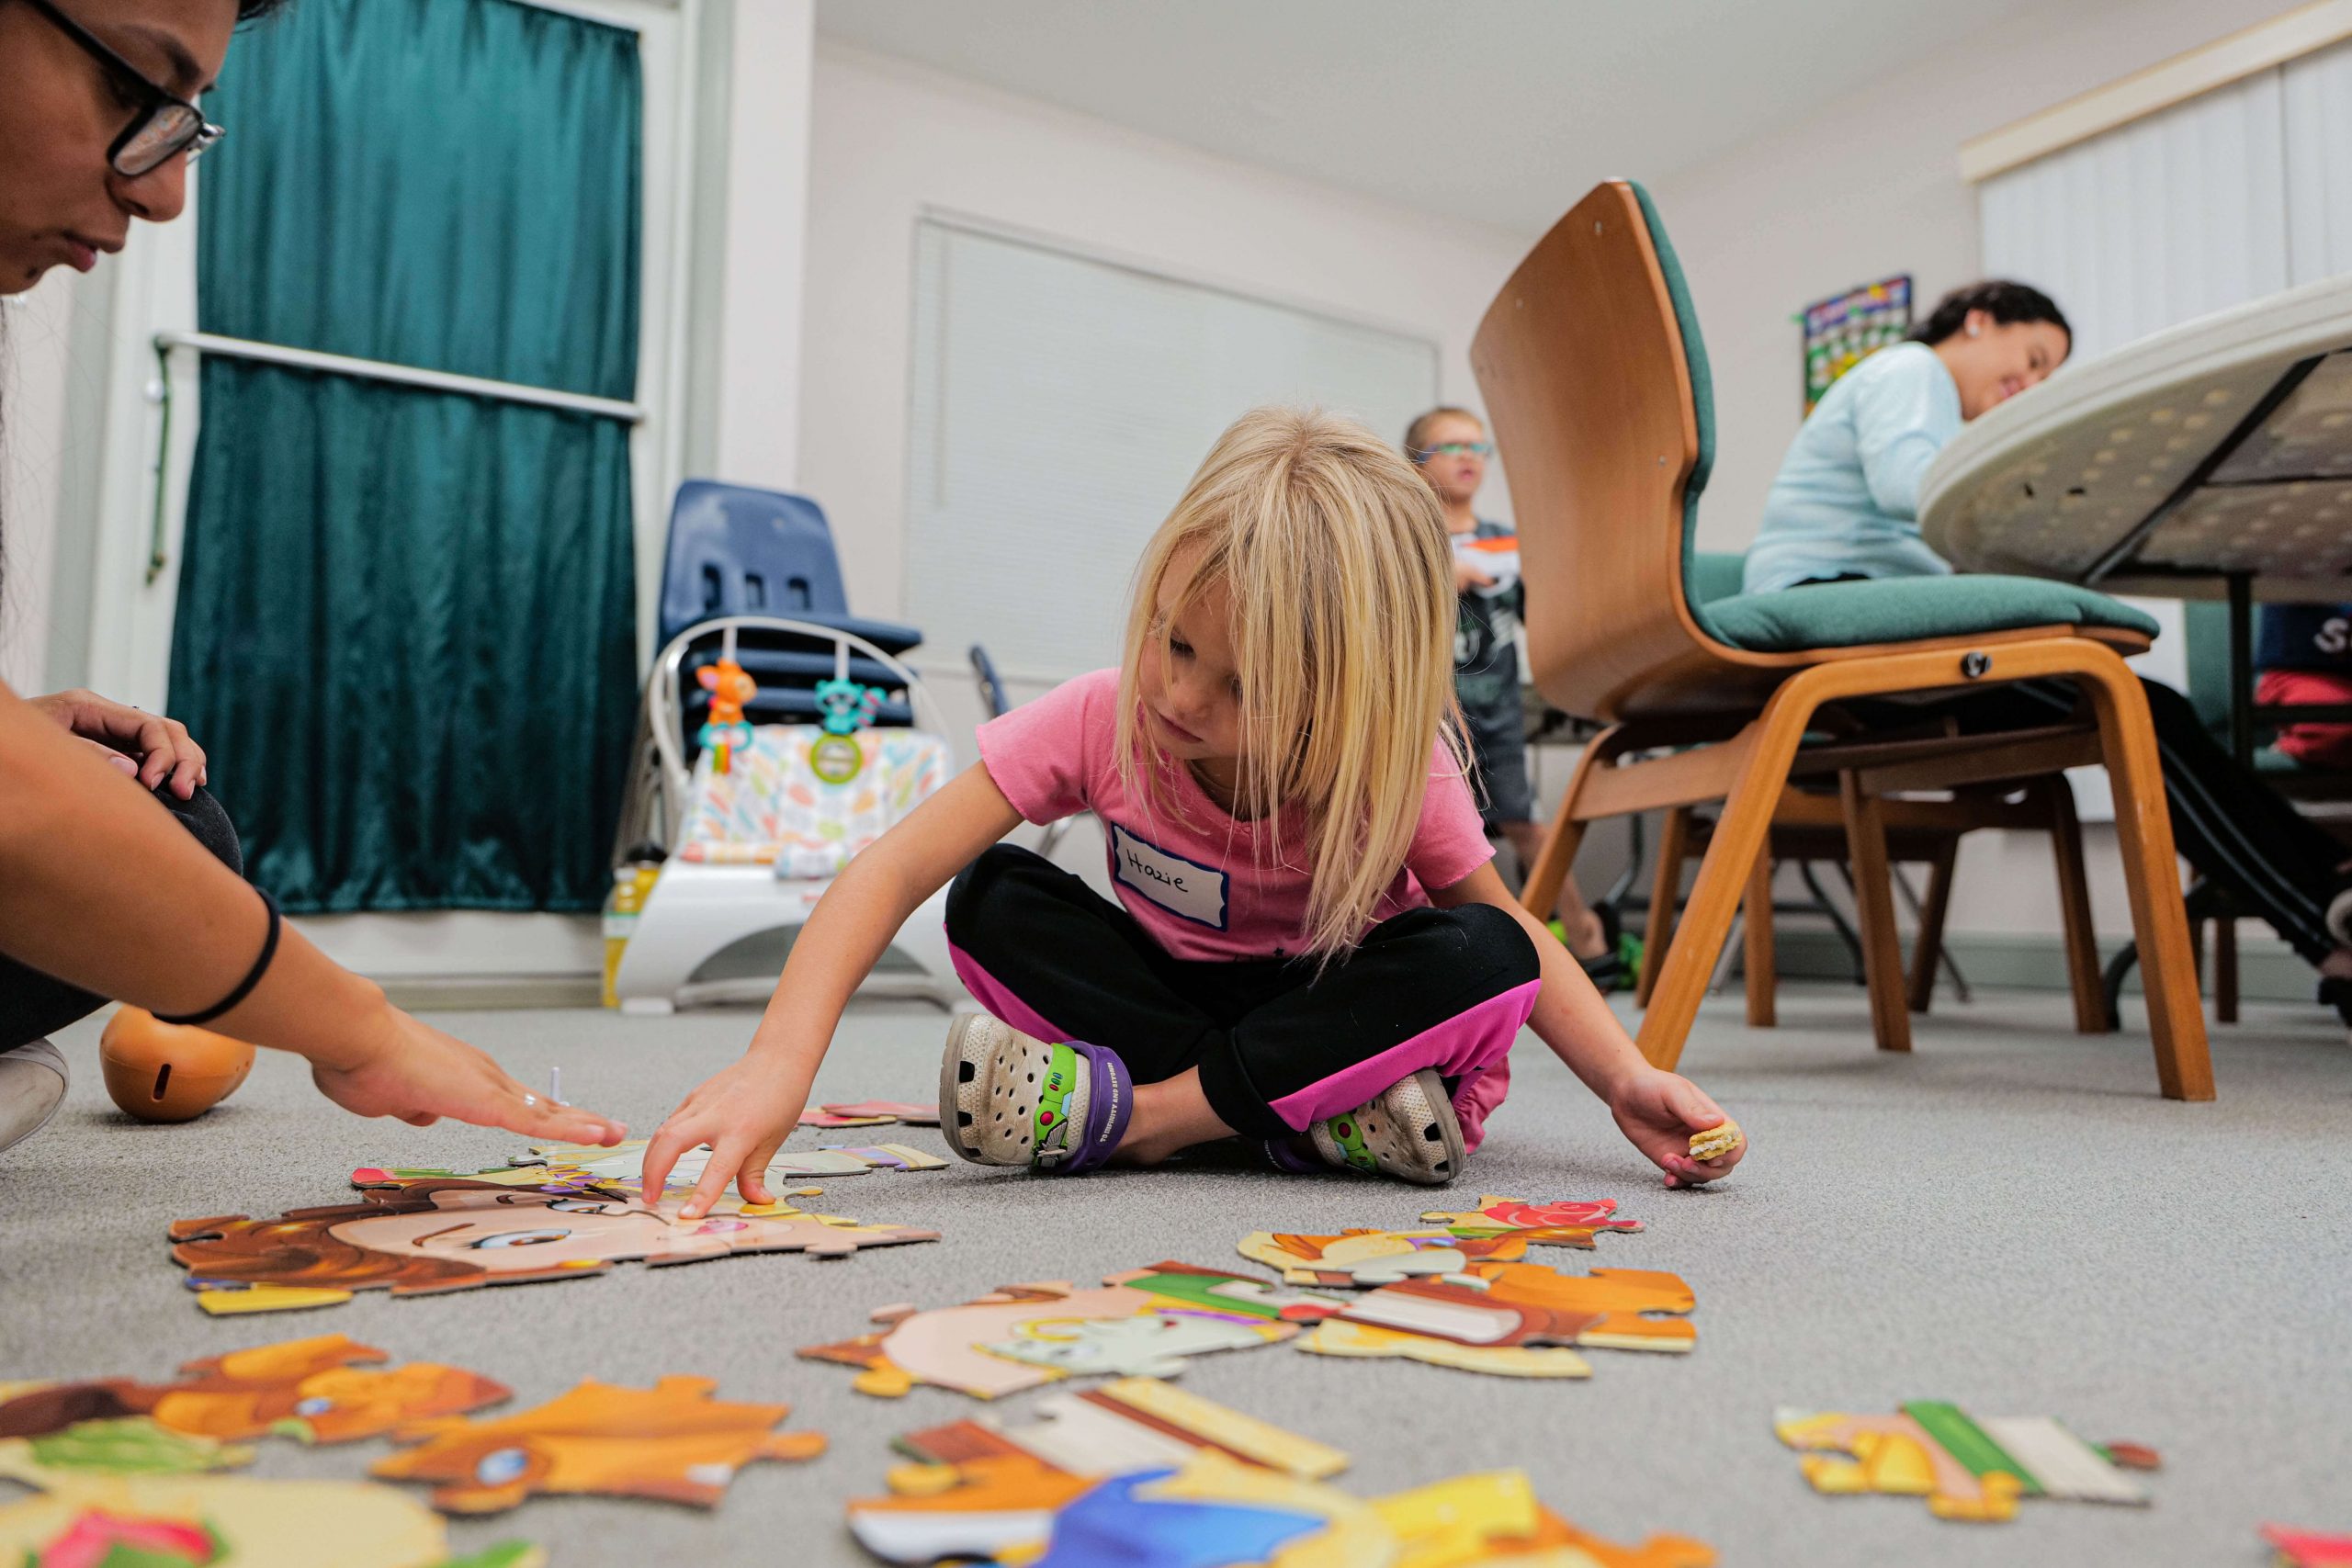 Girls plays with toys on floor